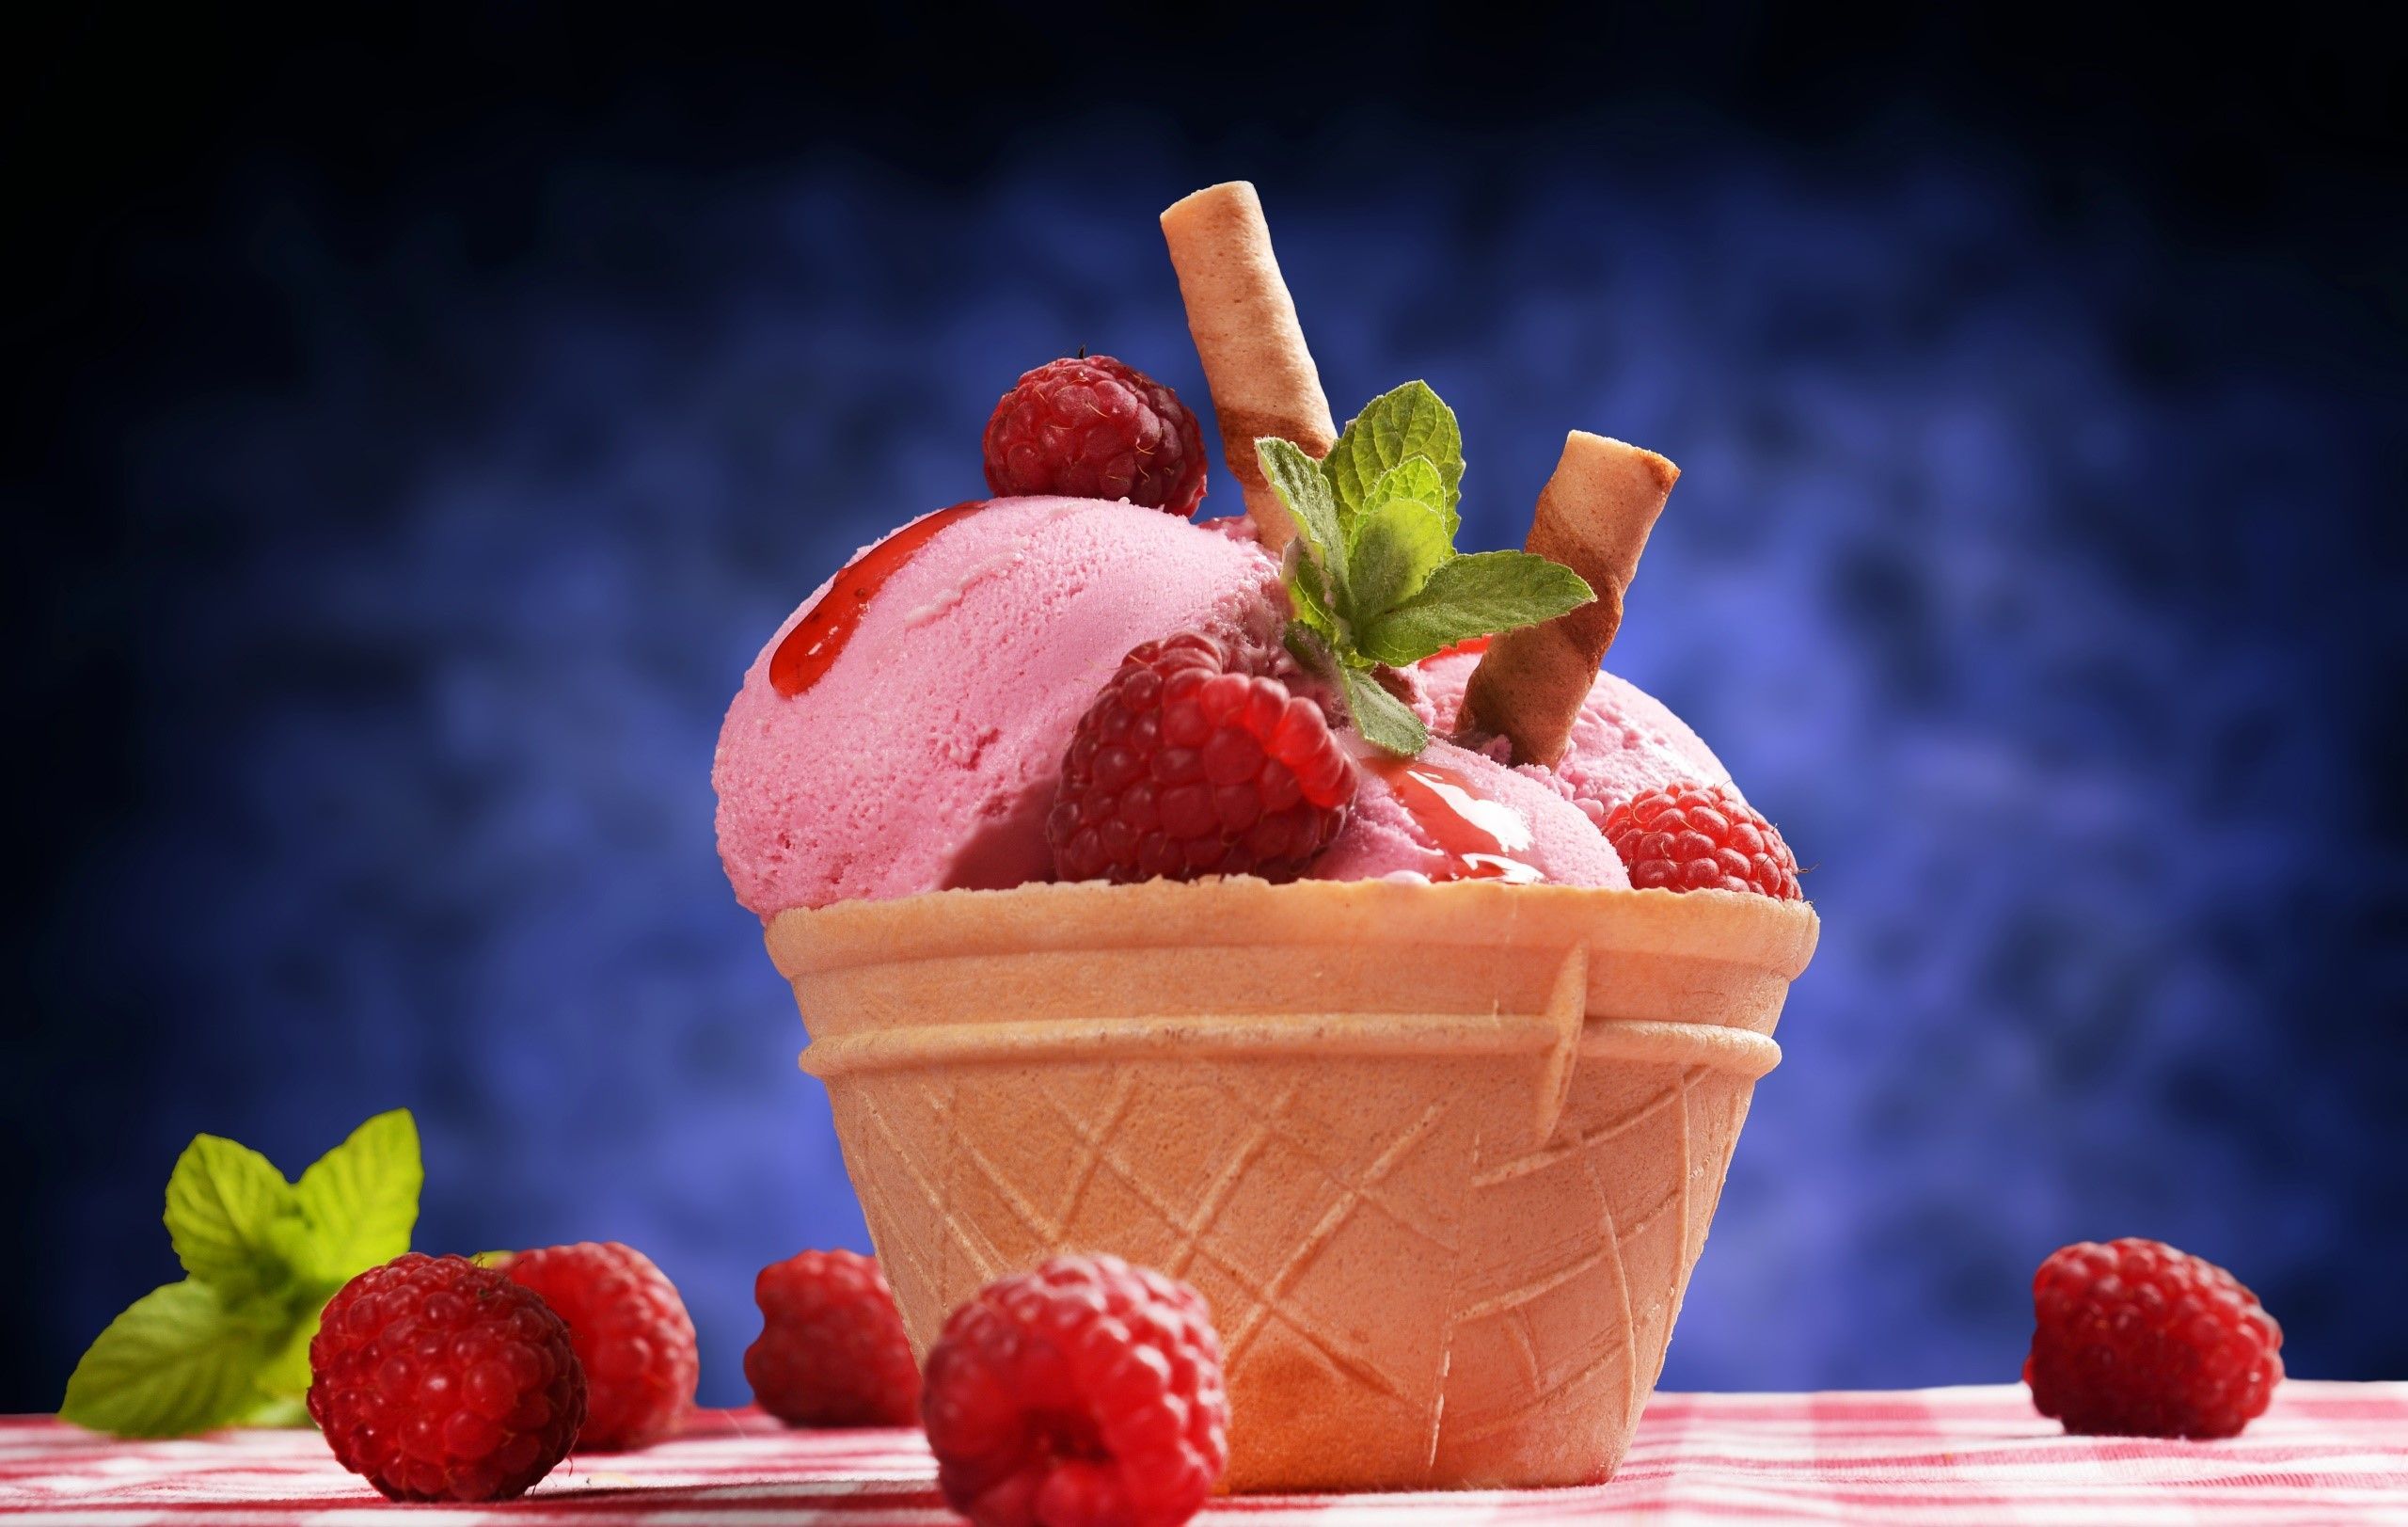 A cone of raspberry ice cream with mint leaves and wafers - Ice cream